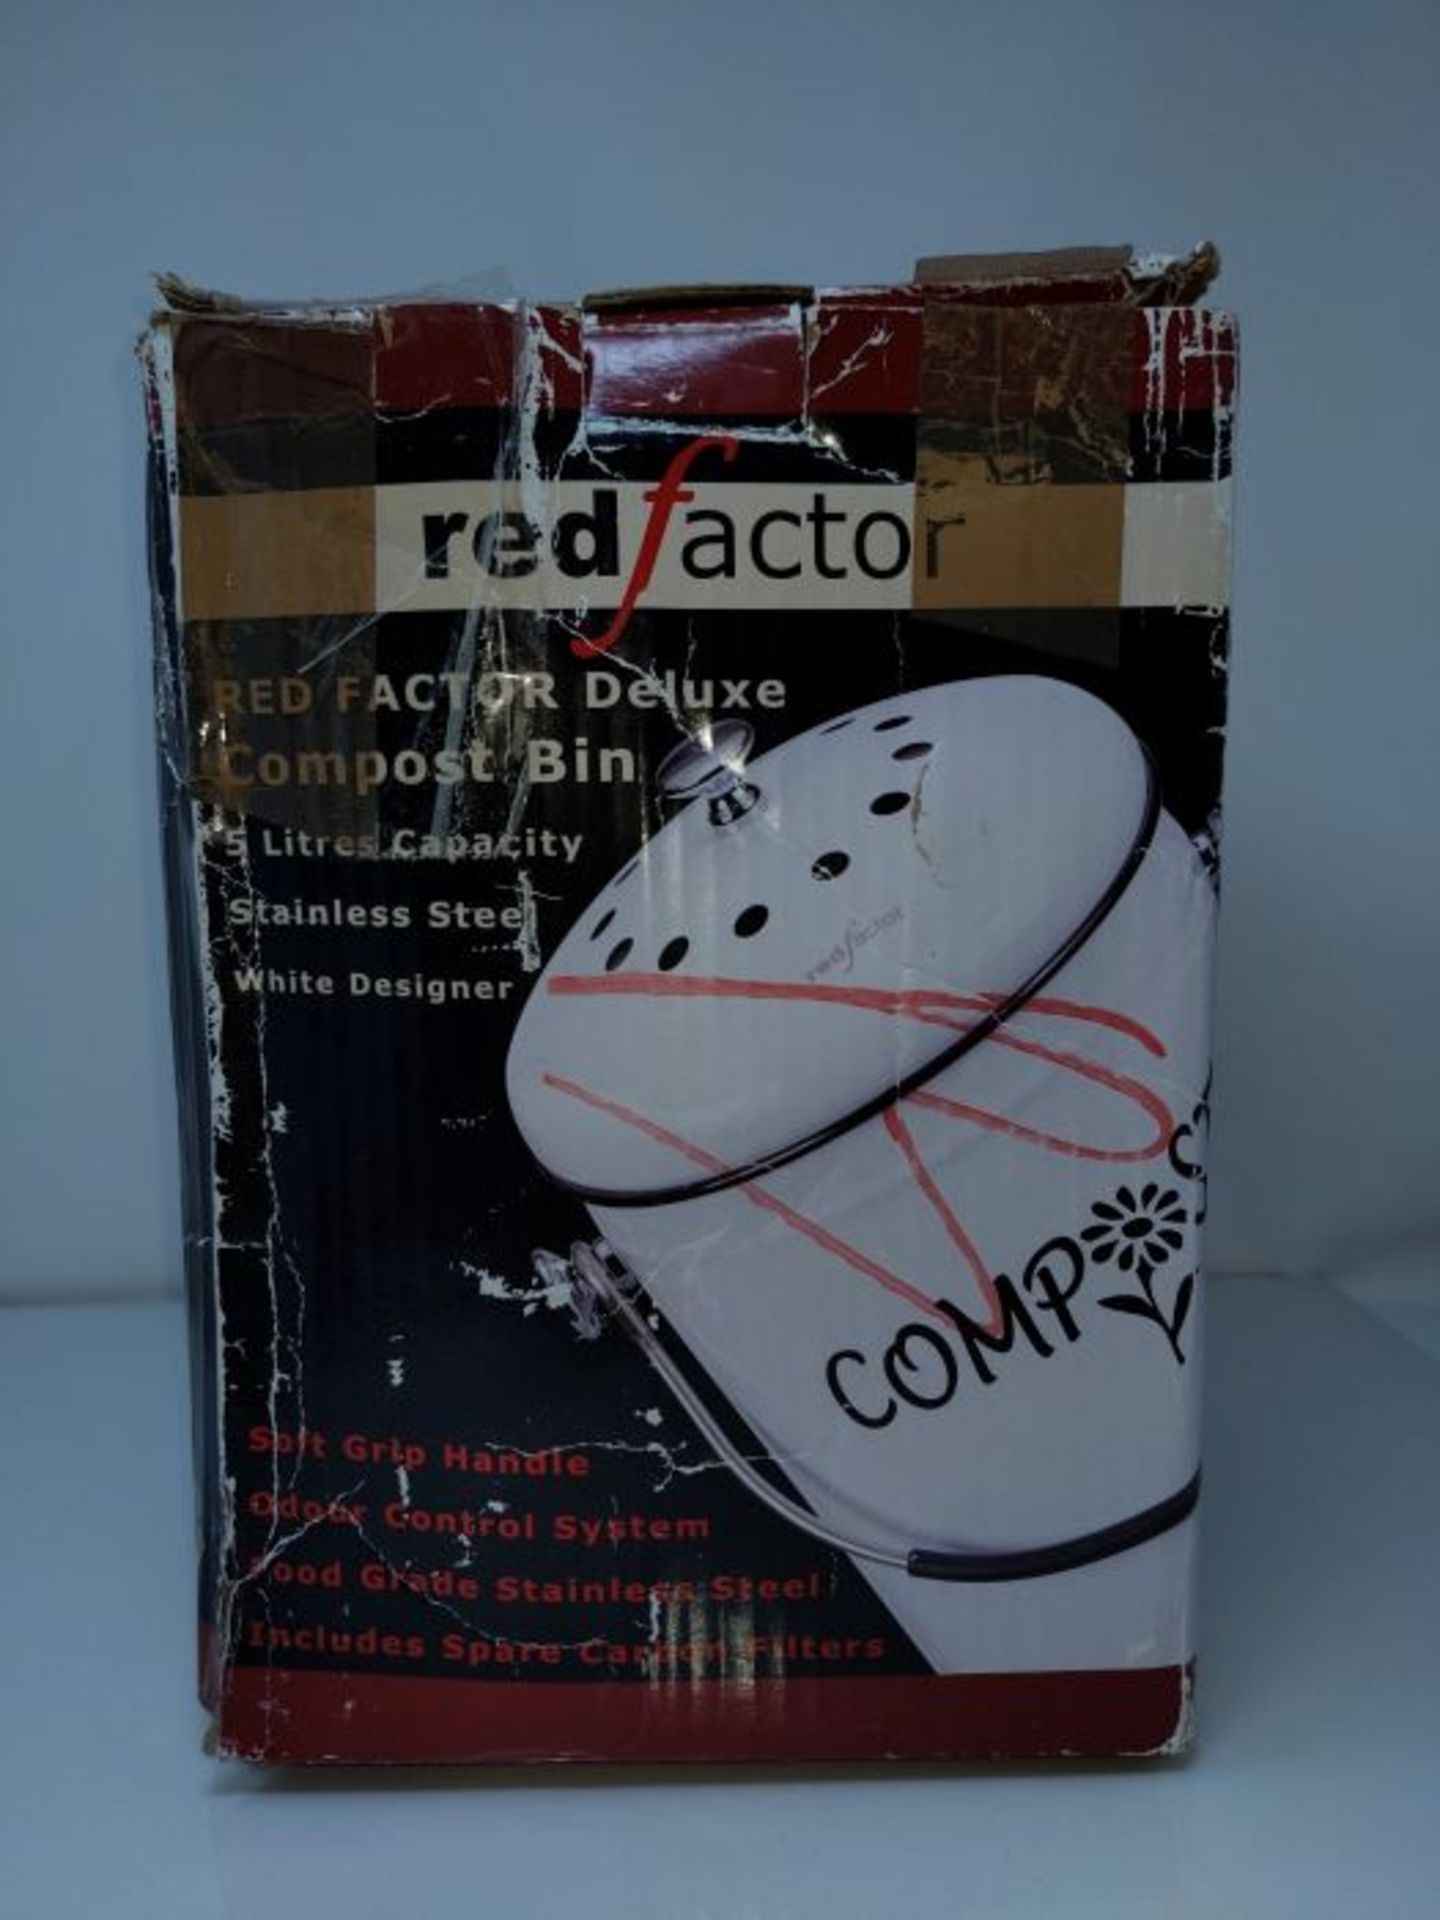 [CRACKED] RED FACTOR Deluxe Compost Bin for Kitchen Worktop - Stainless Steel Food Was - Image 2 of 3